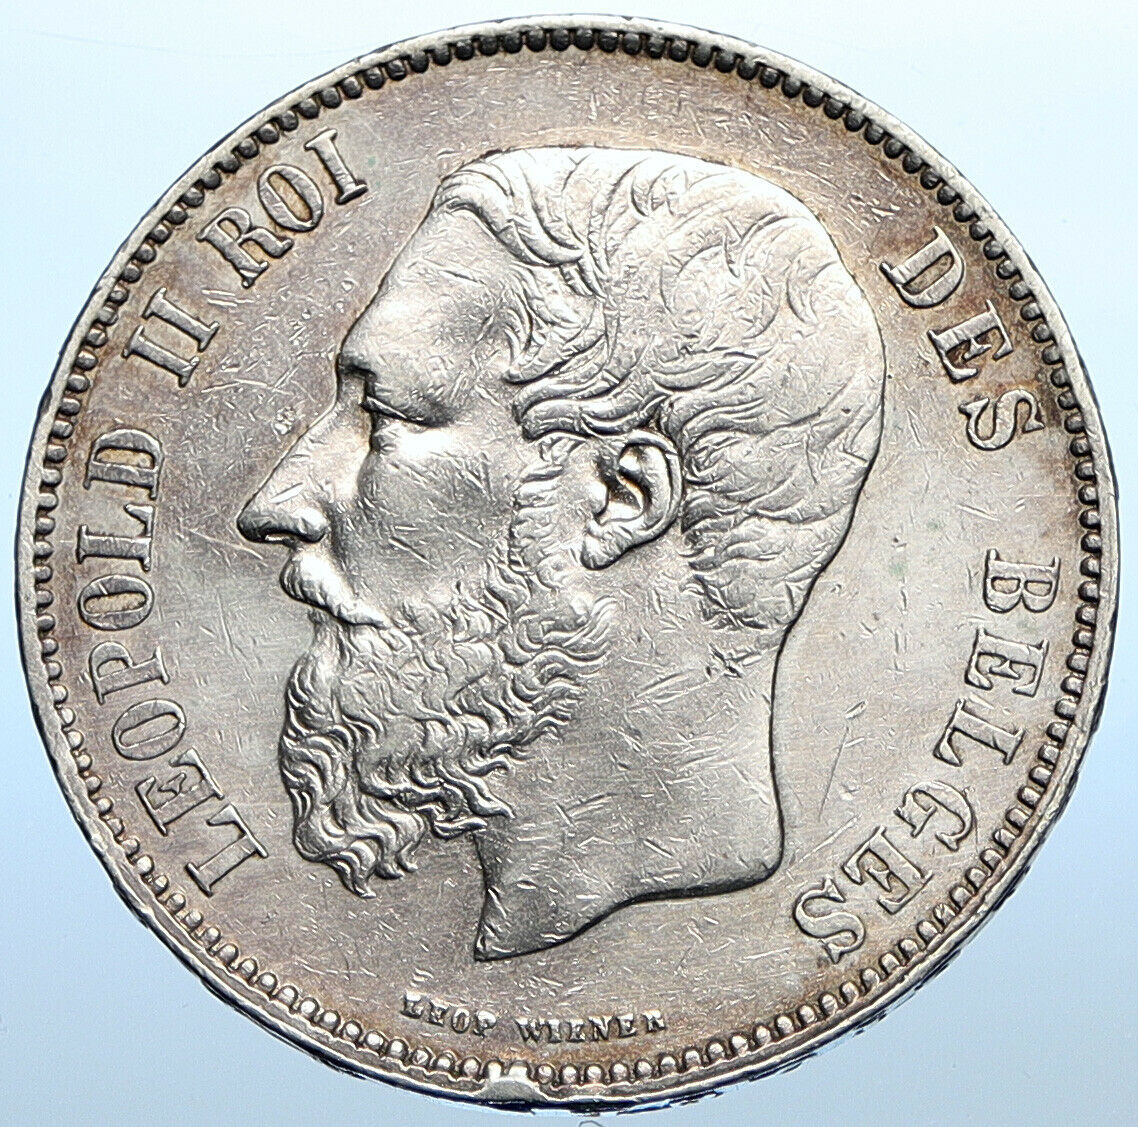 1870 BELGIUM with King LEOPOLD II and LION Antique Silver 5 Francs Coin i108358